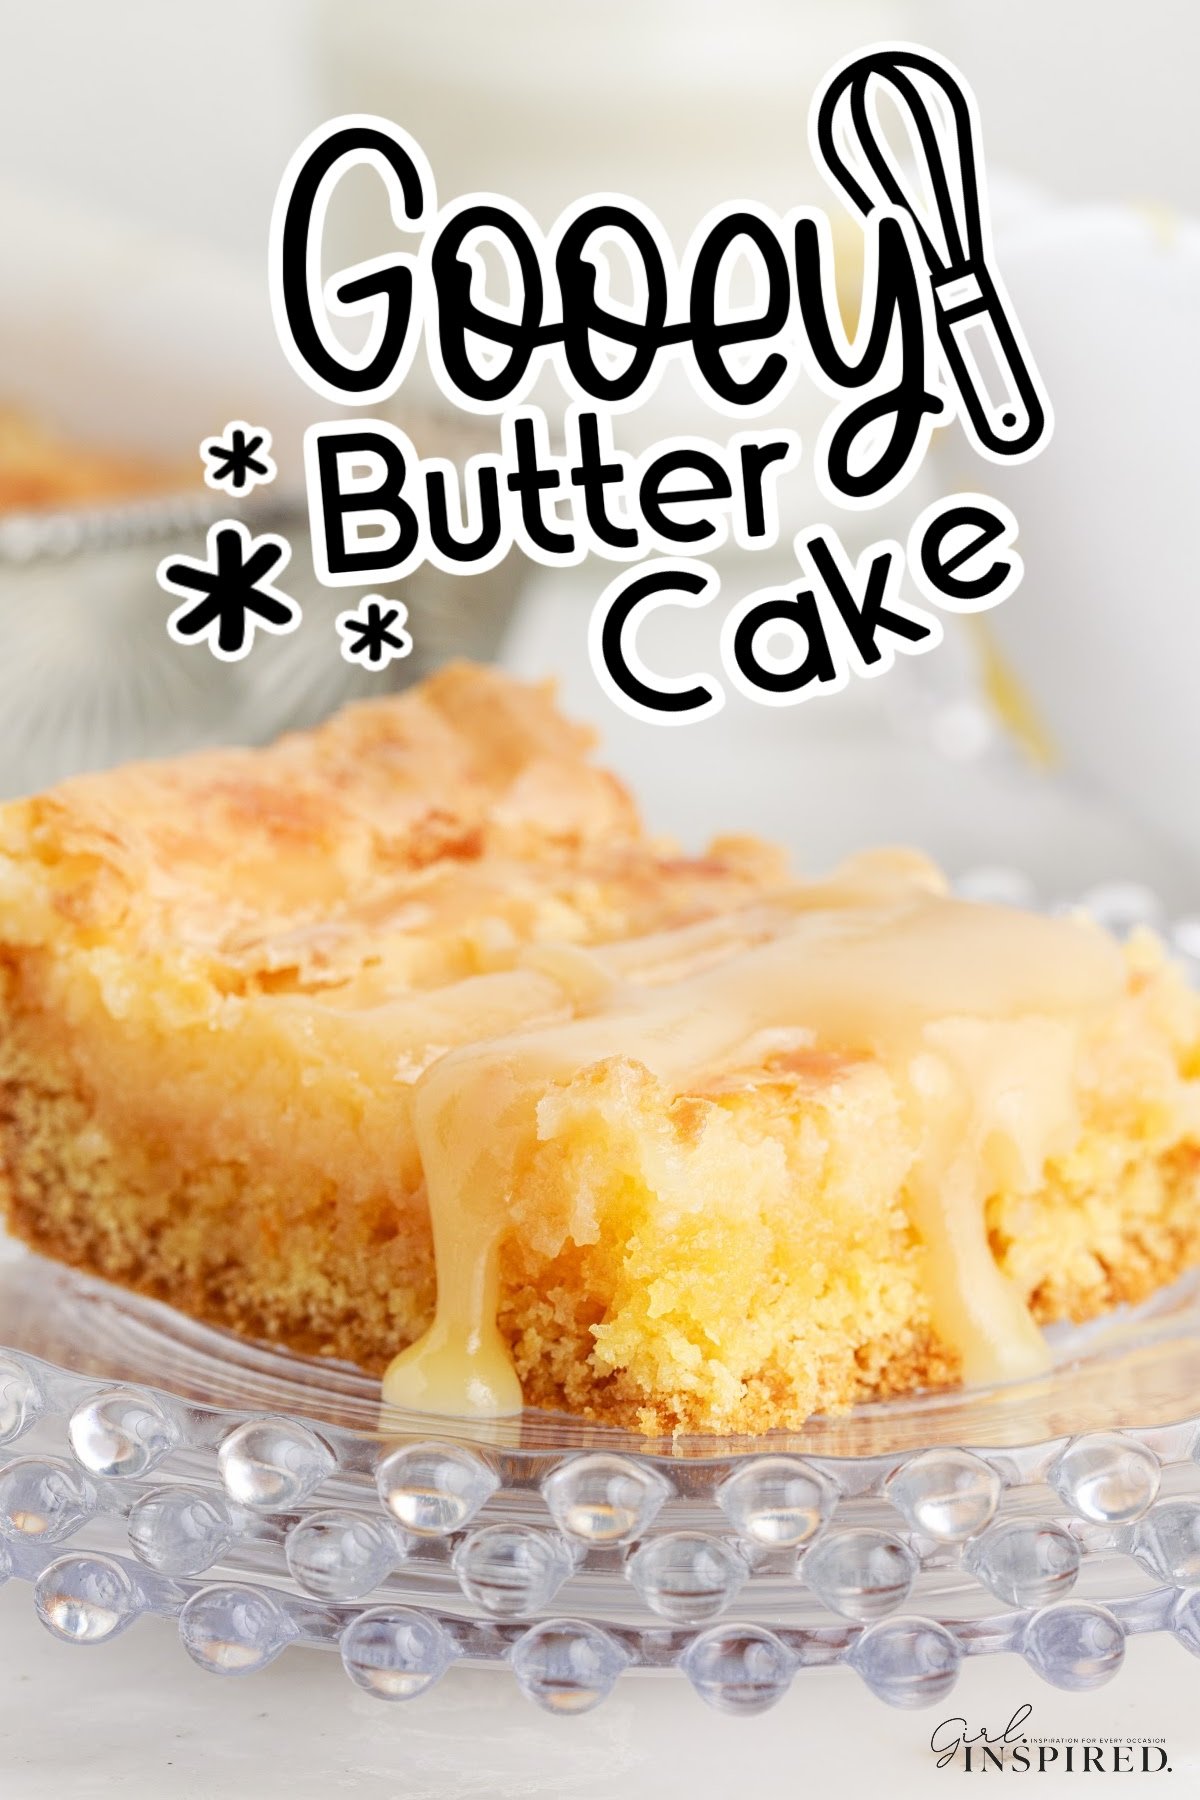 A piece of Gooey Butter Cake with text overlay.